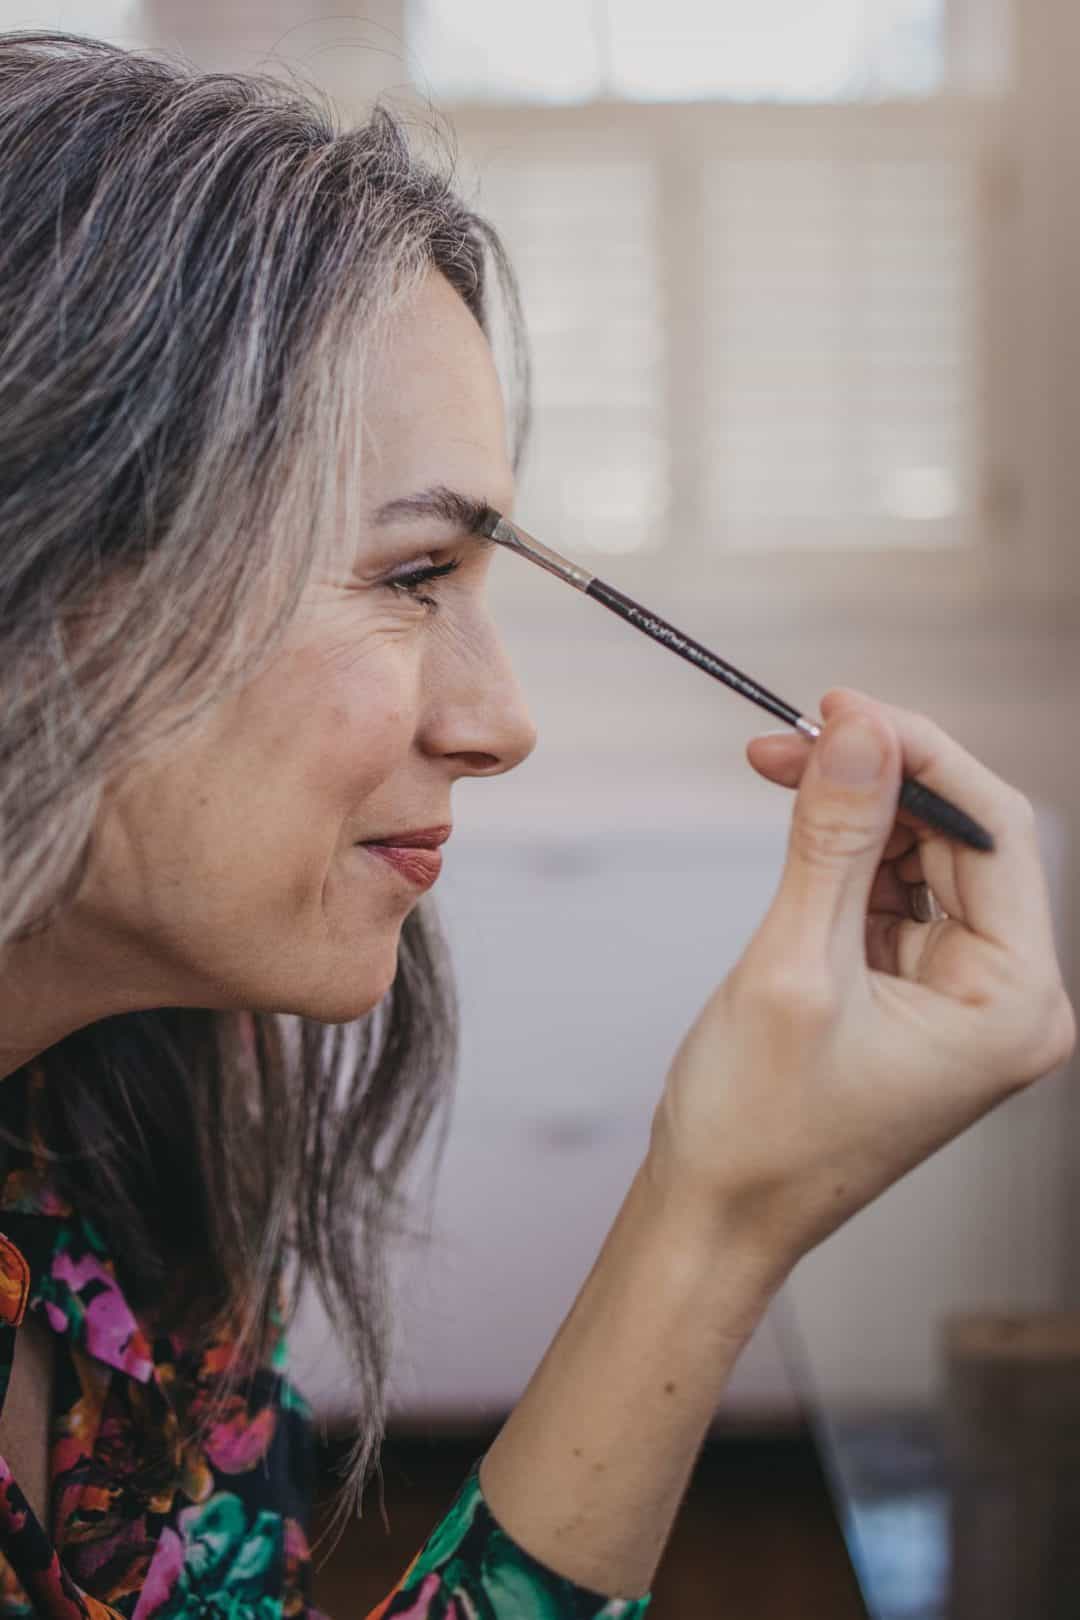 a sideshot of a woman applying makeup to her eyebrow while smiling